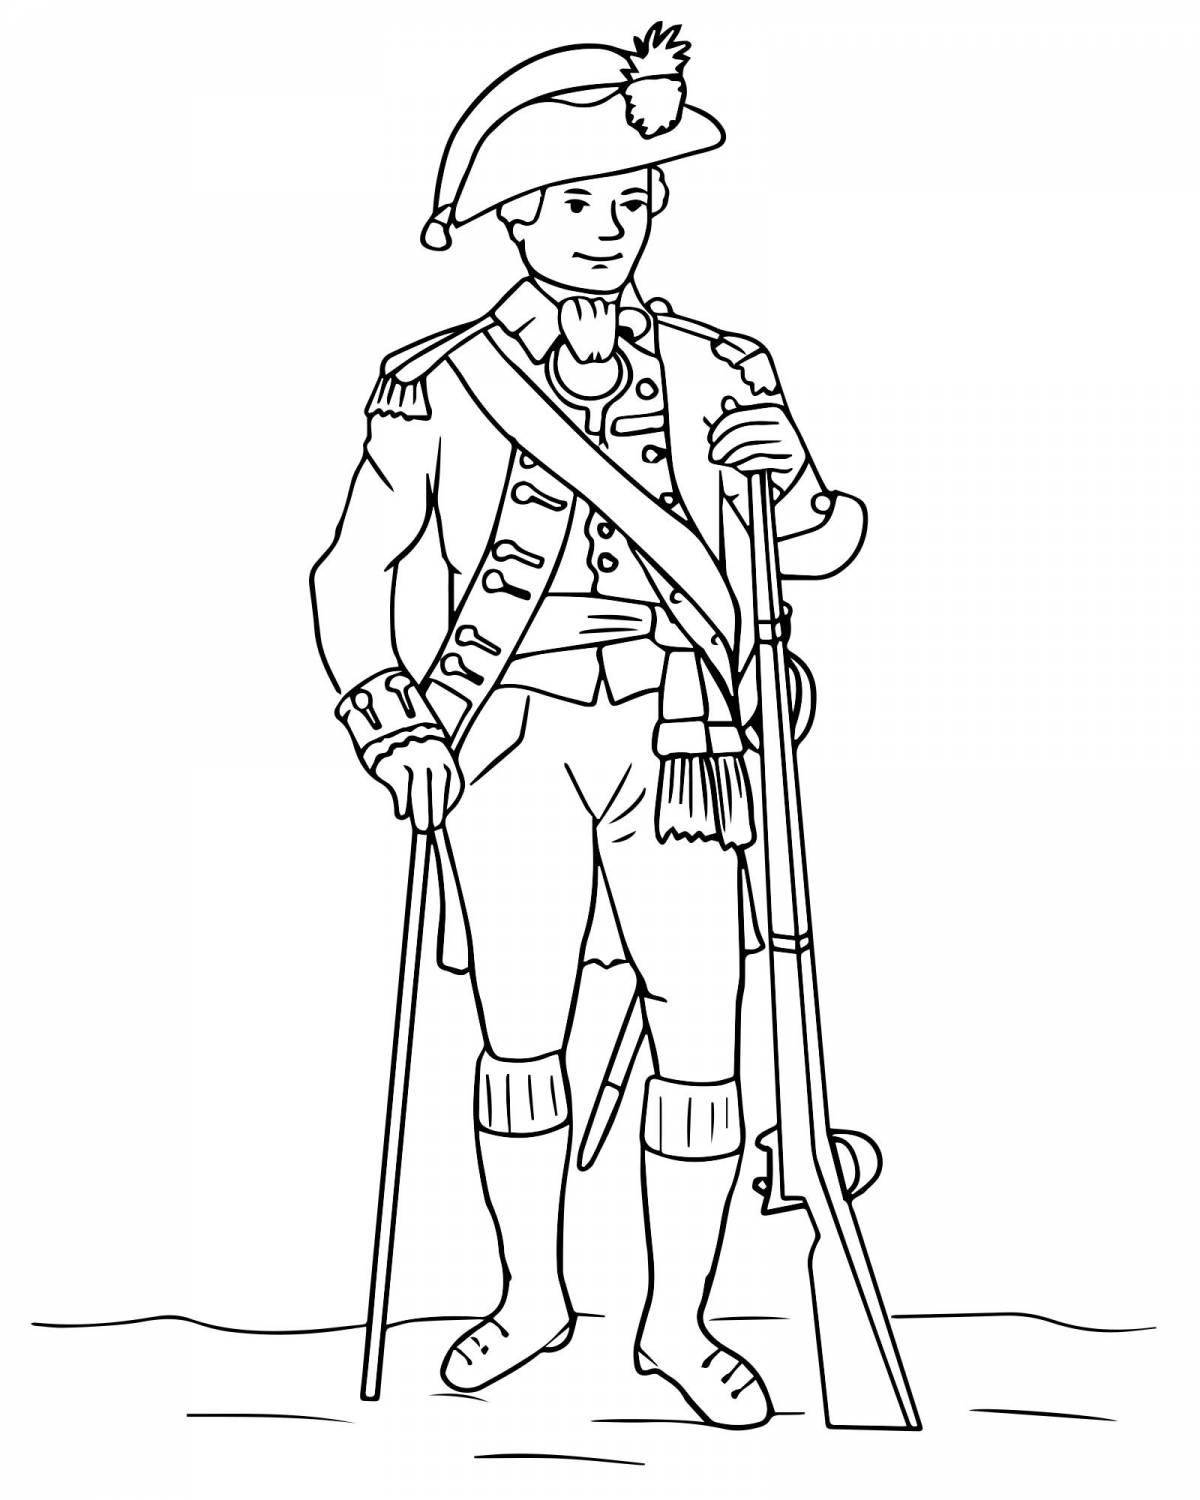 Exciting Russian soldier coloring book for kids